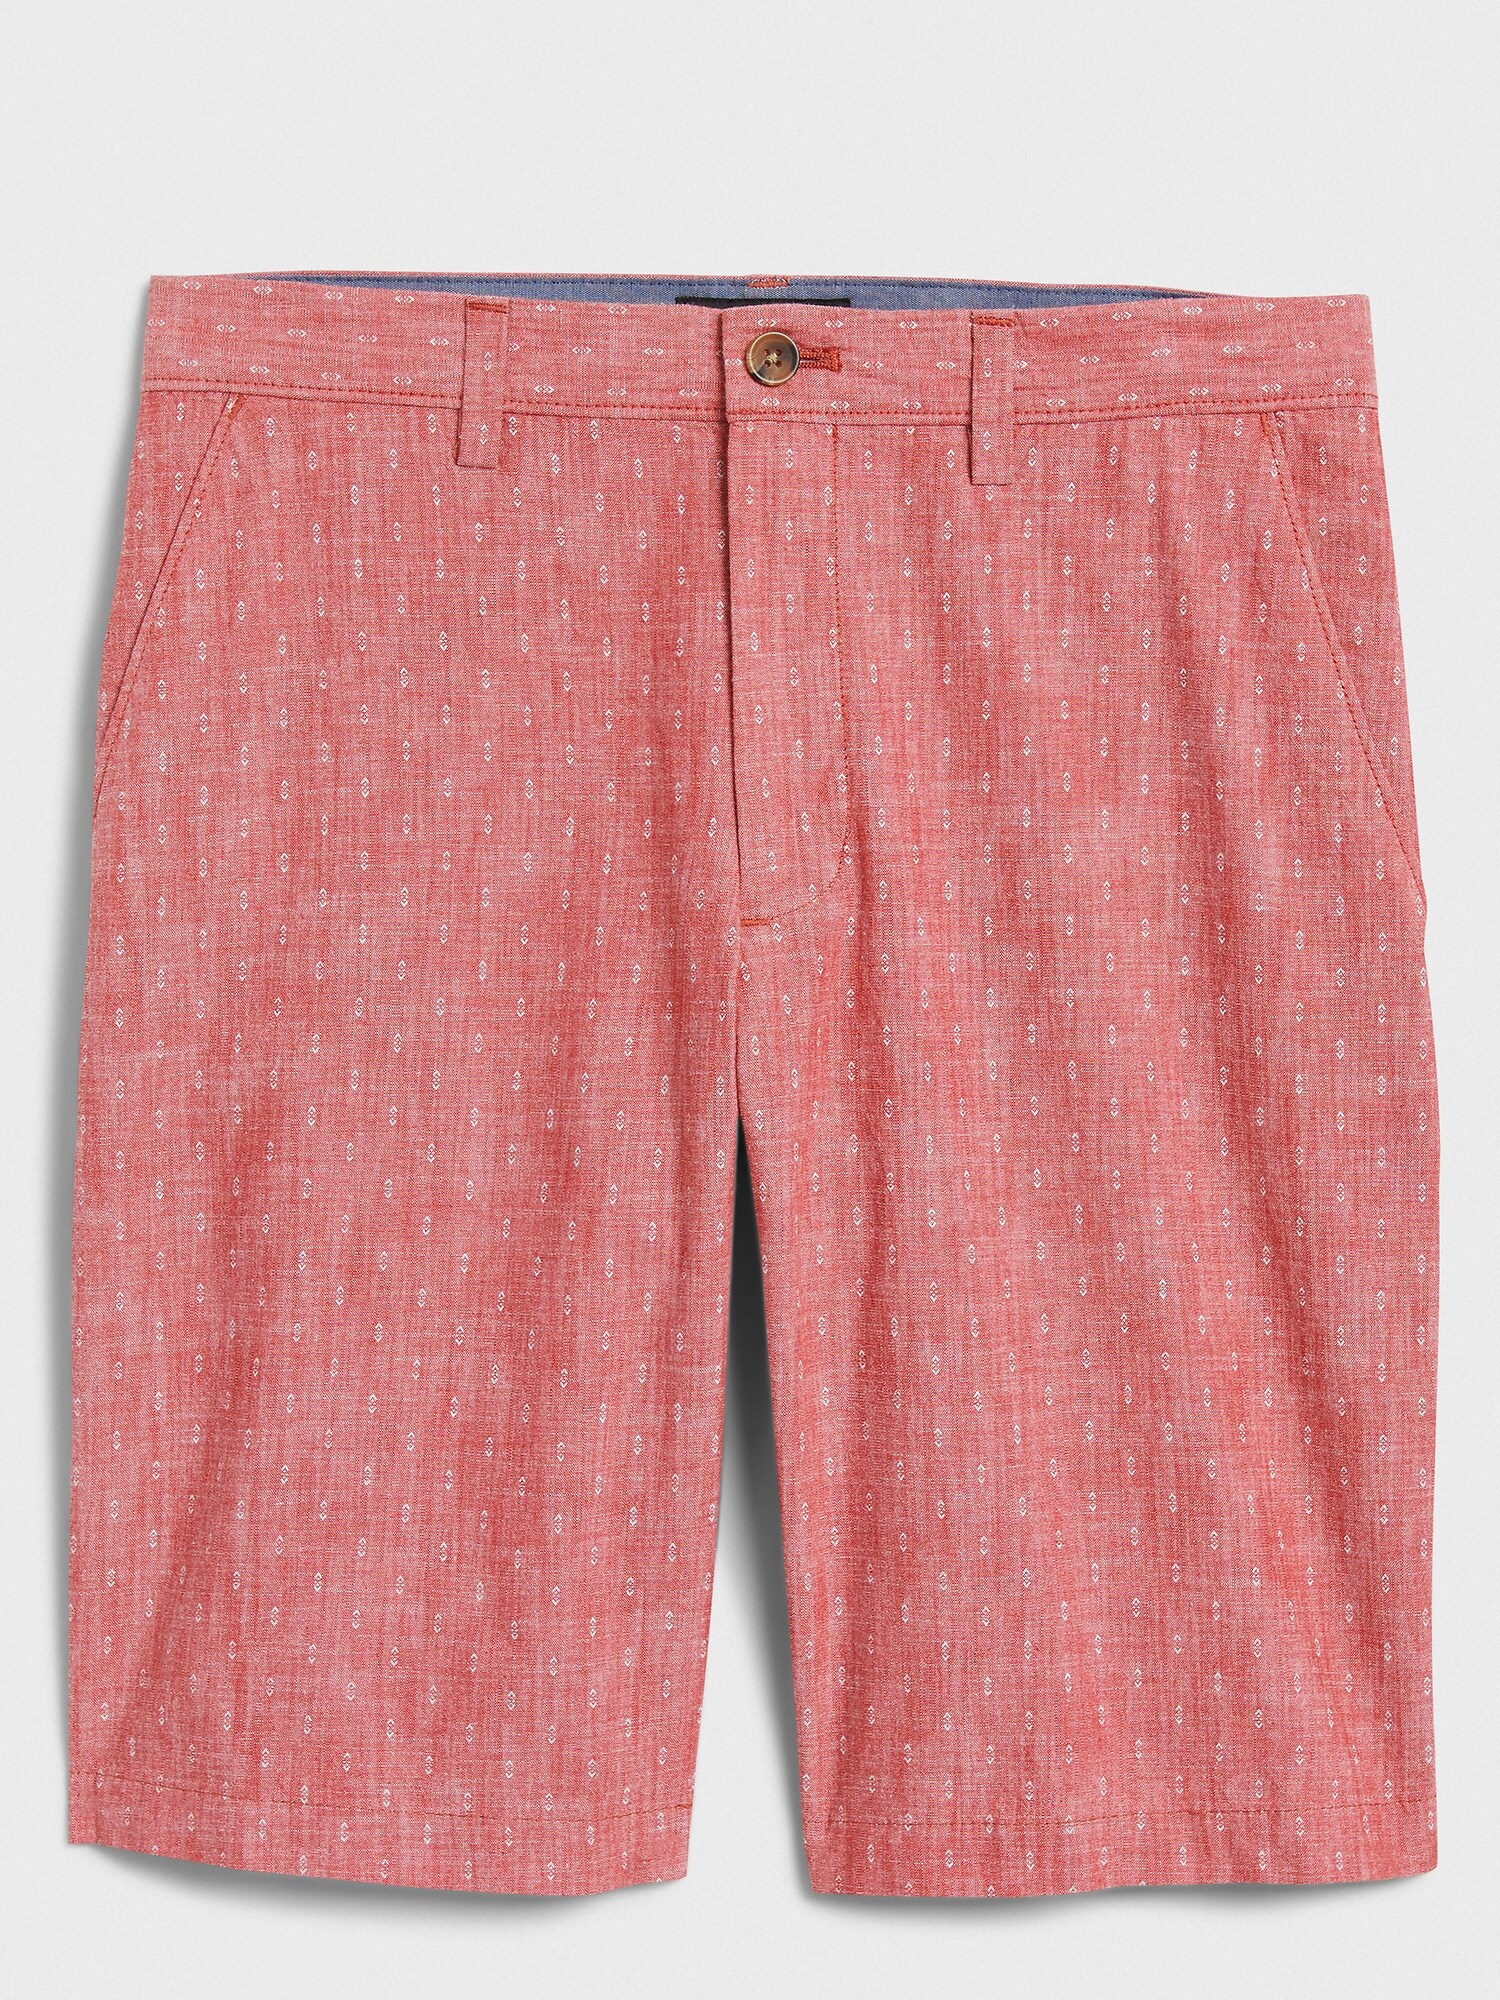 11" Emerson Red Print Shorts